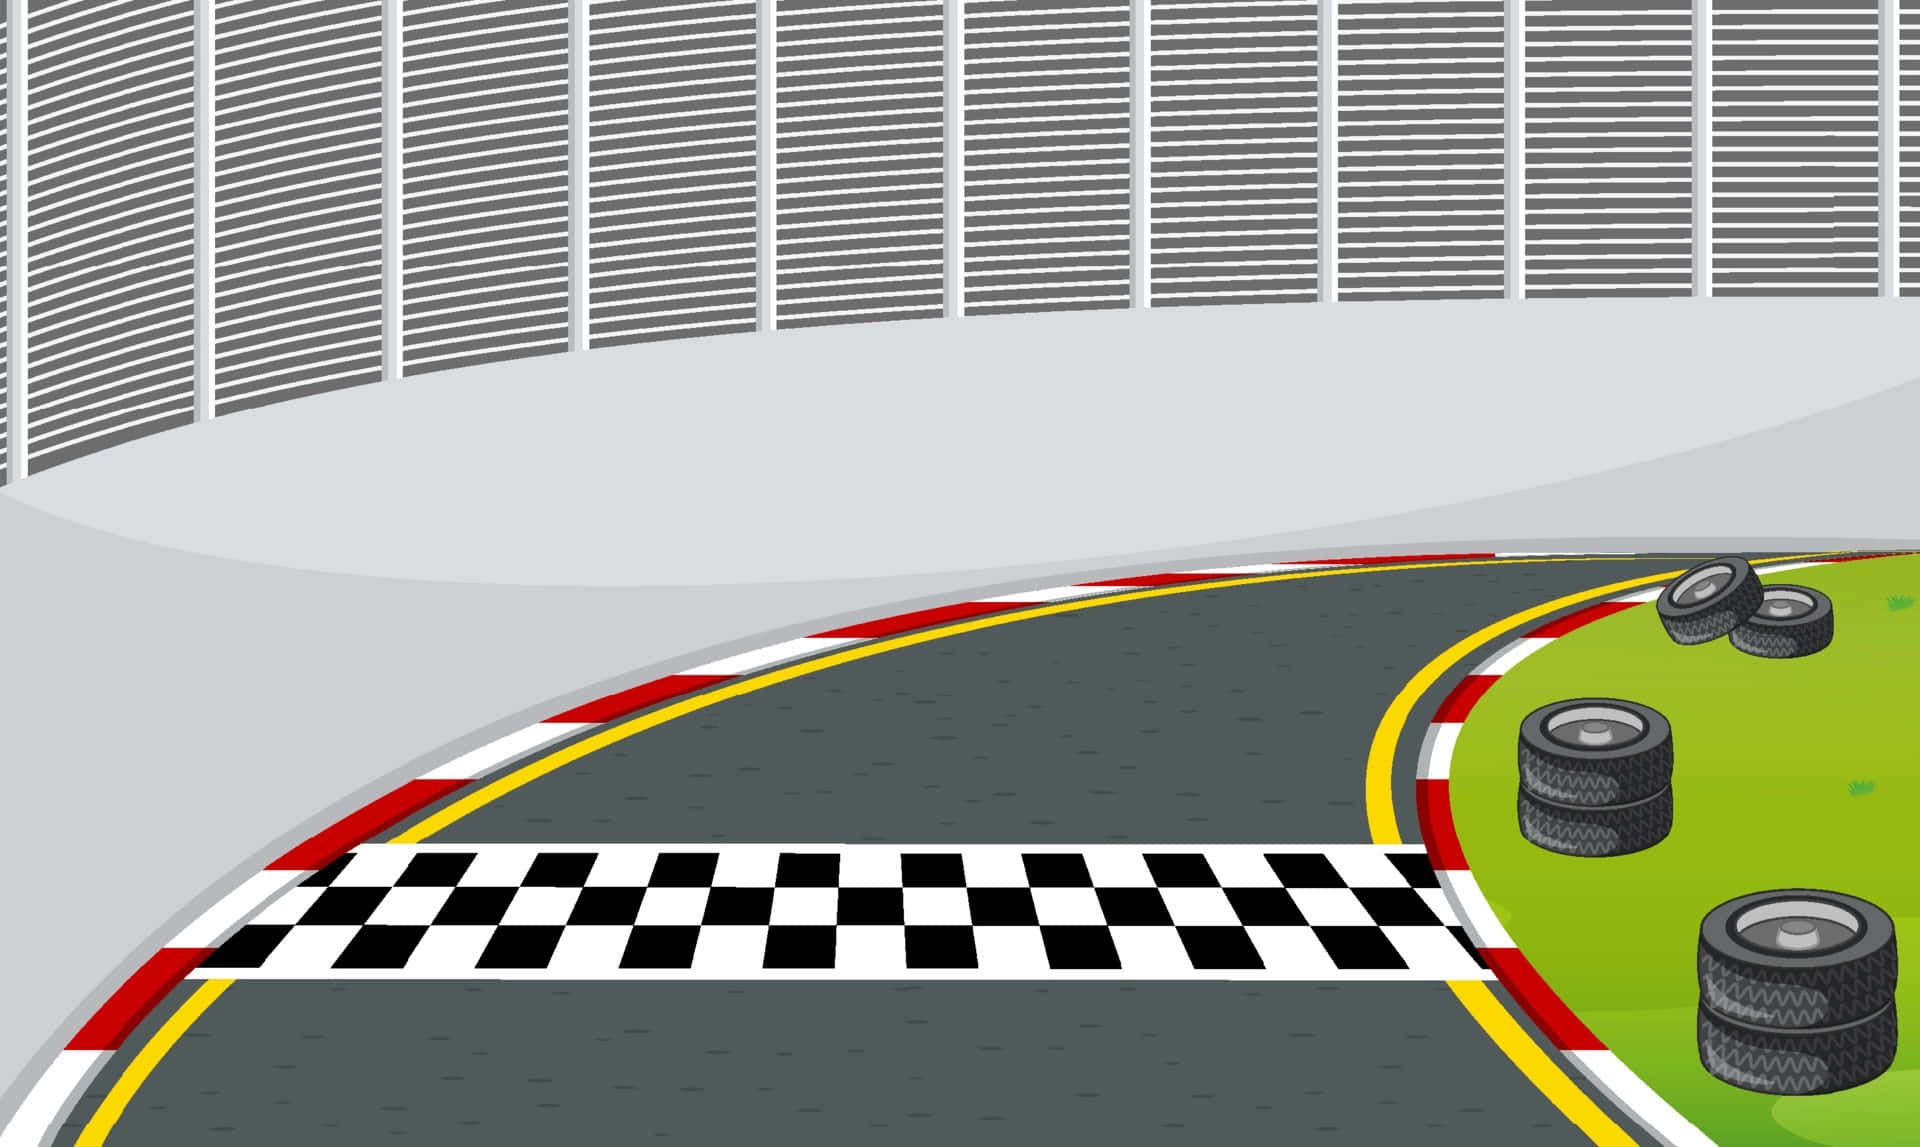 A Race Track With Tires And A Checkered Flag